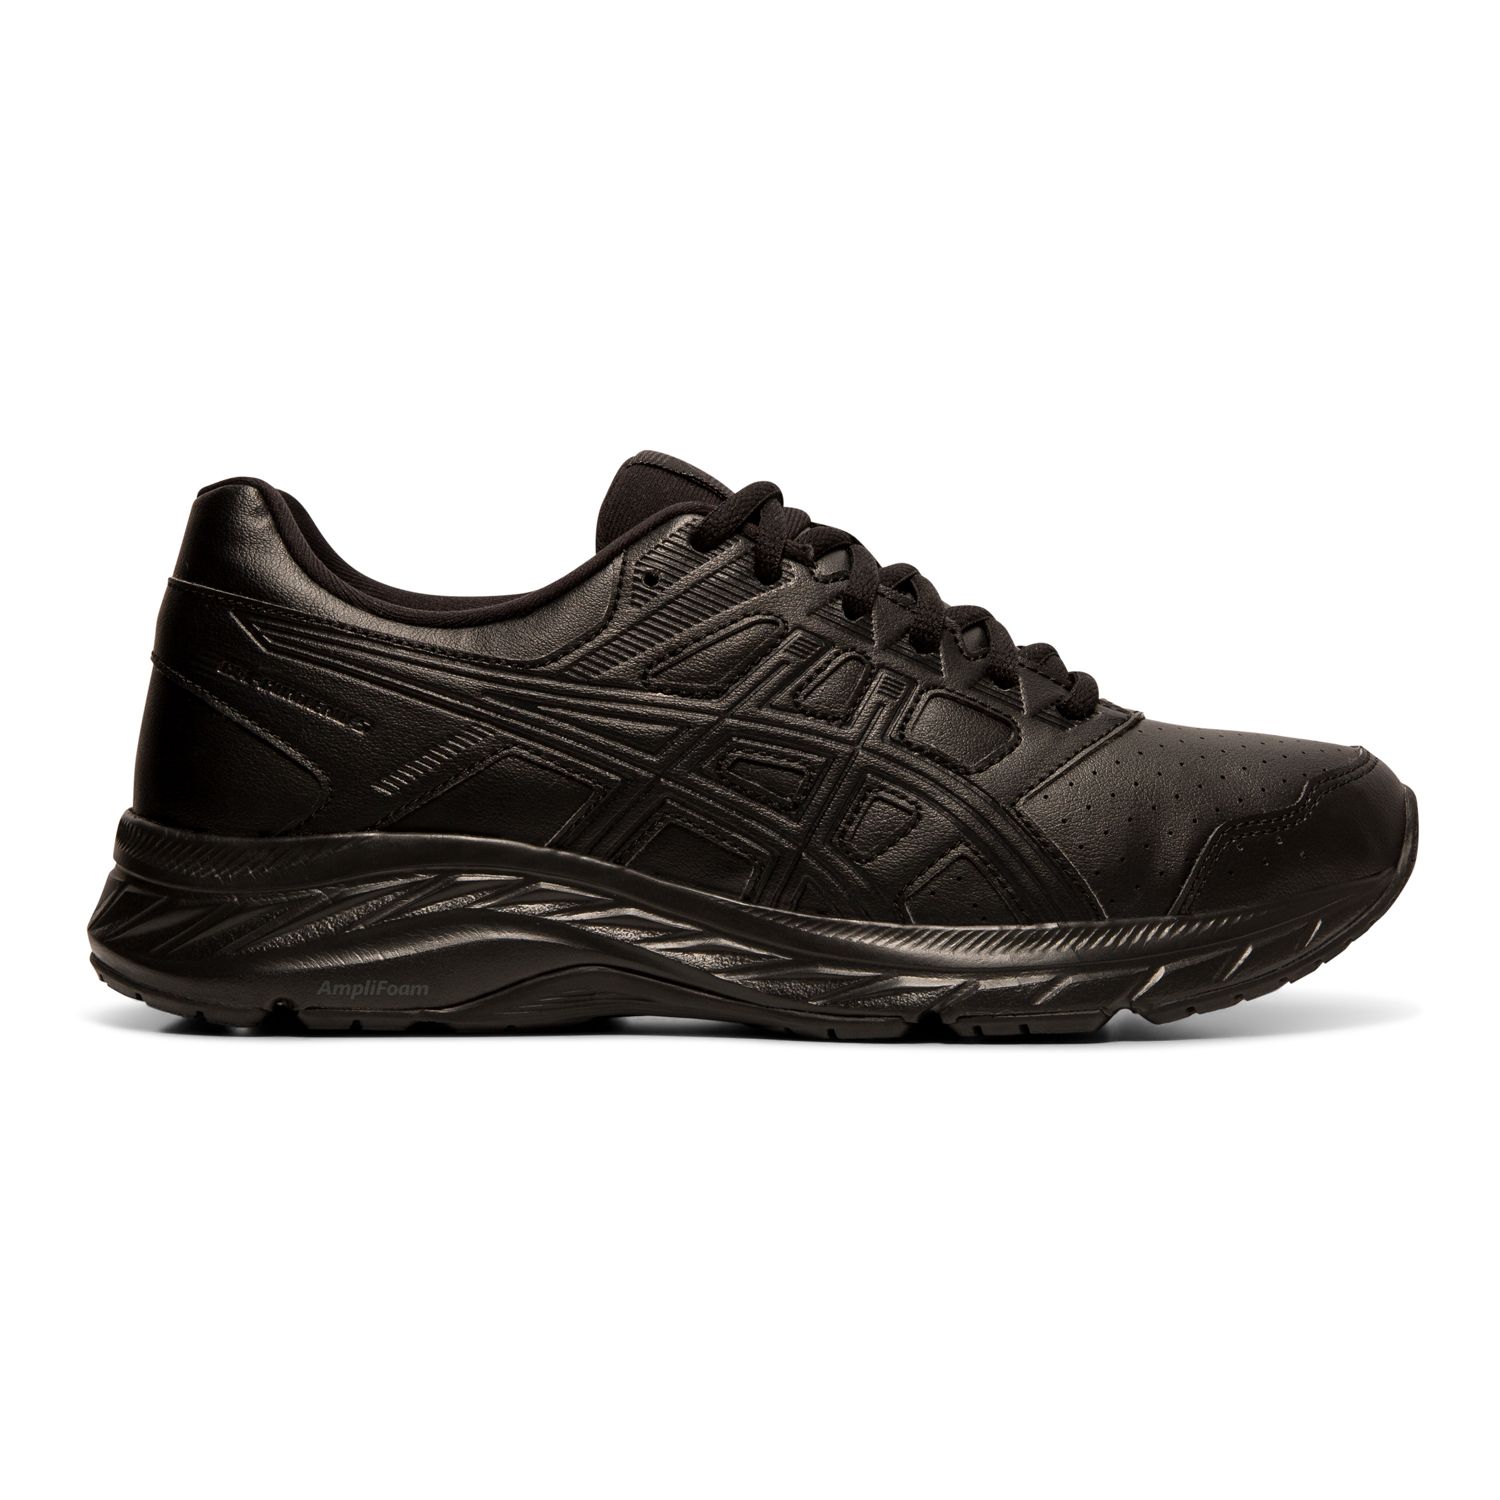 asics gel contend review